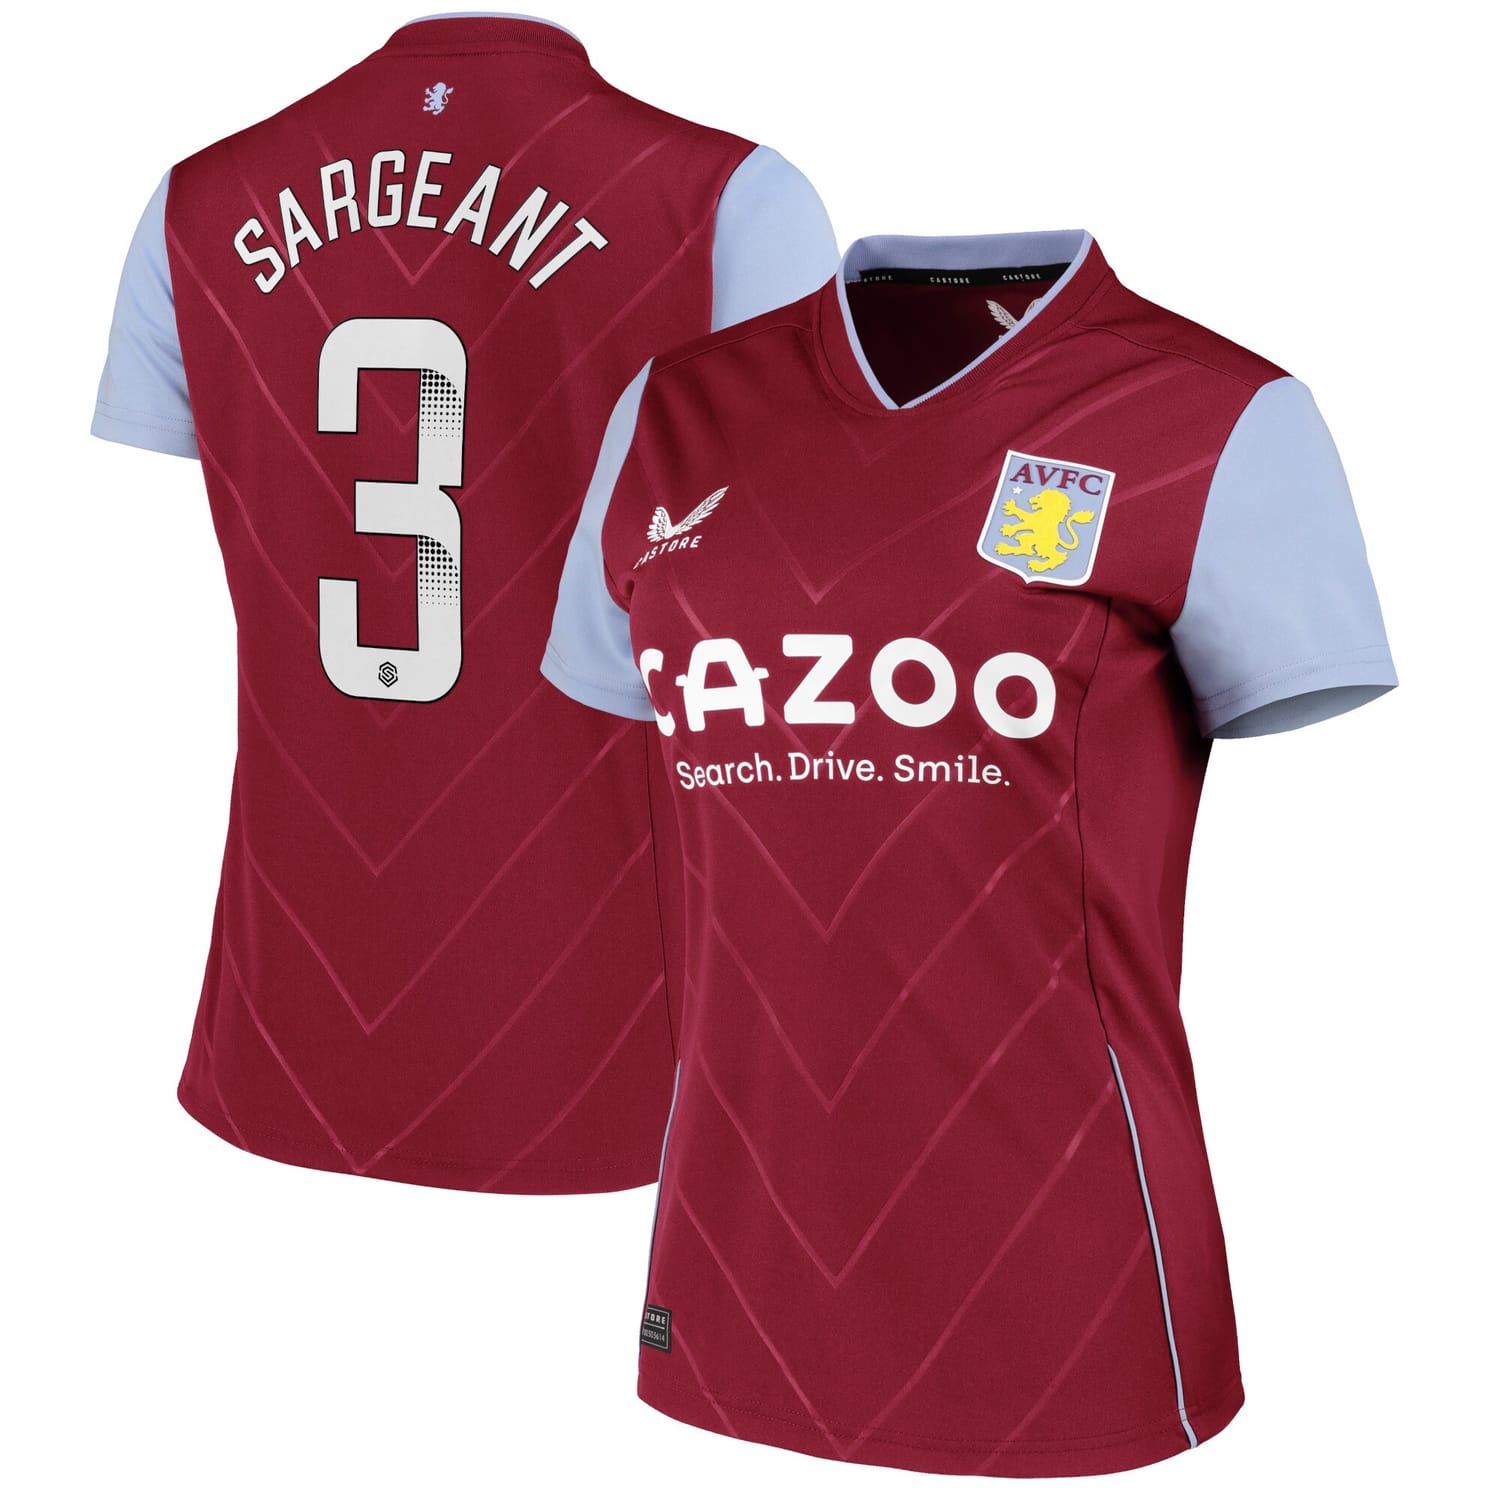 Premier League Aston Villa Home WSL Jersey Shirt 2022-23 player Meaghan Sargeant 3 printing for Women